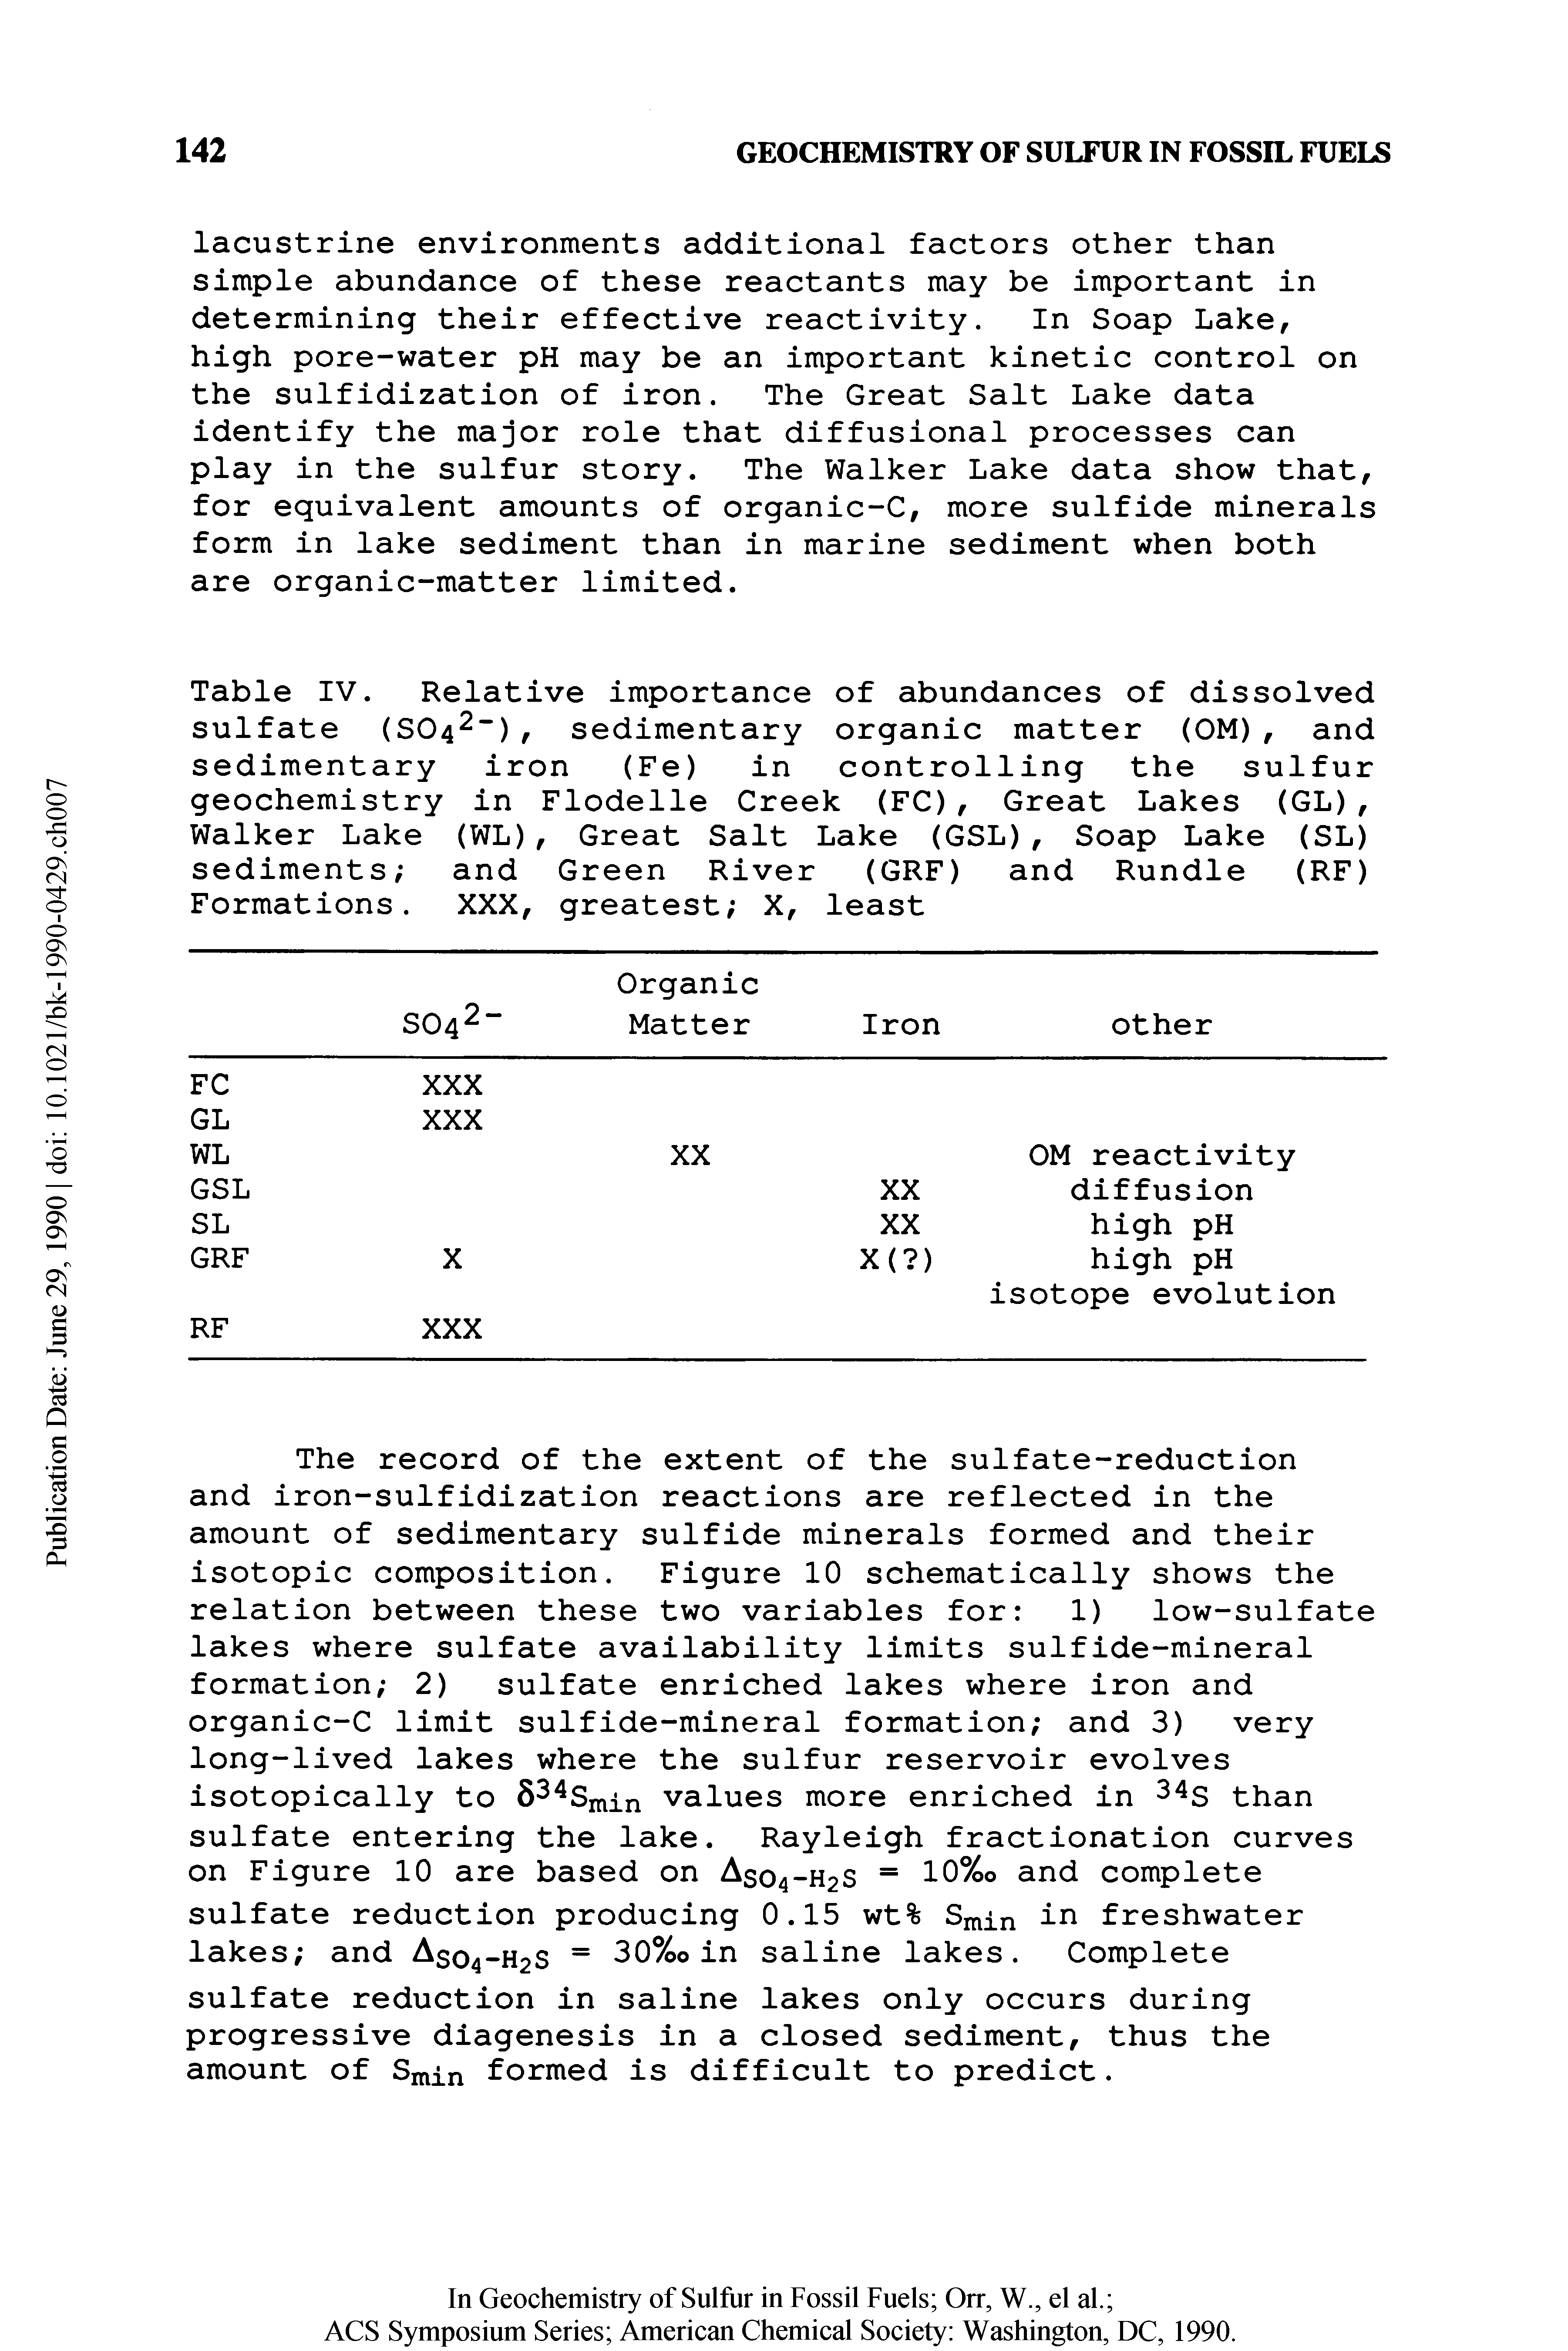 Table IV. Relative importance of abundances of dissolved sulfate (S042-), sedimentary organic matter (OM), and sedimentary iron (Fe) in controlling the sulfur geochemistry in Flodelle Creek (FC), Great Lakes (GL), Walker Lake (WL), Great Salt Lake (GSL), Soap Lake (SL) sediments and Green River (GRF) and Rundle (RF) Formations. XXX, greatest X, least...